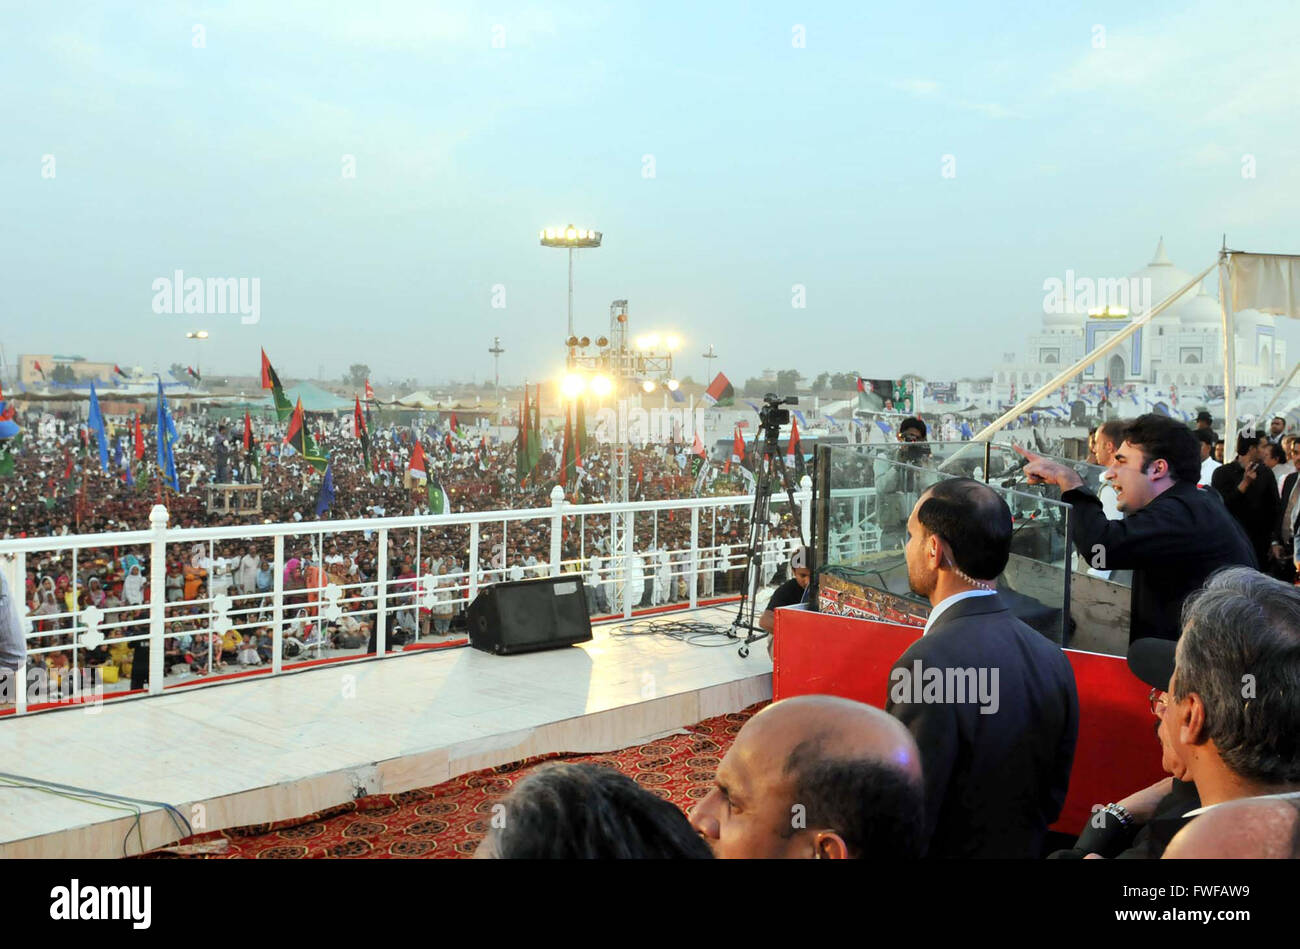 Peoples Party (PPP) Chairman, Bilawal Bhutto Zardari addresses to public gather on occasion of 37th death anniversary commemorate of Peoples Party (PPP) Founder, Zulfiqar Ali Bhutto held at Bhutto's Mausoleum in Garhi Khuda Bux on Monday, April 04, 2016. Stock Photo